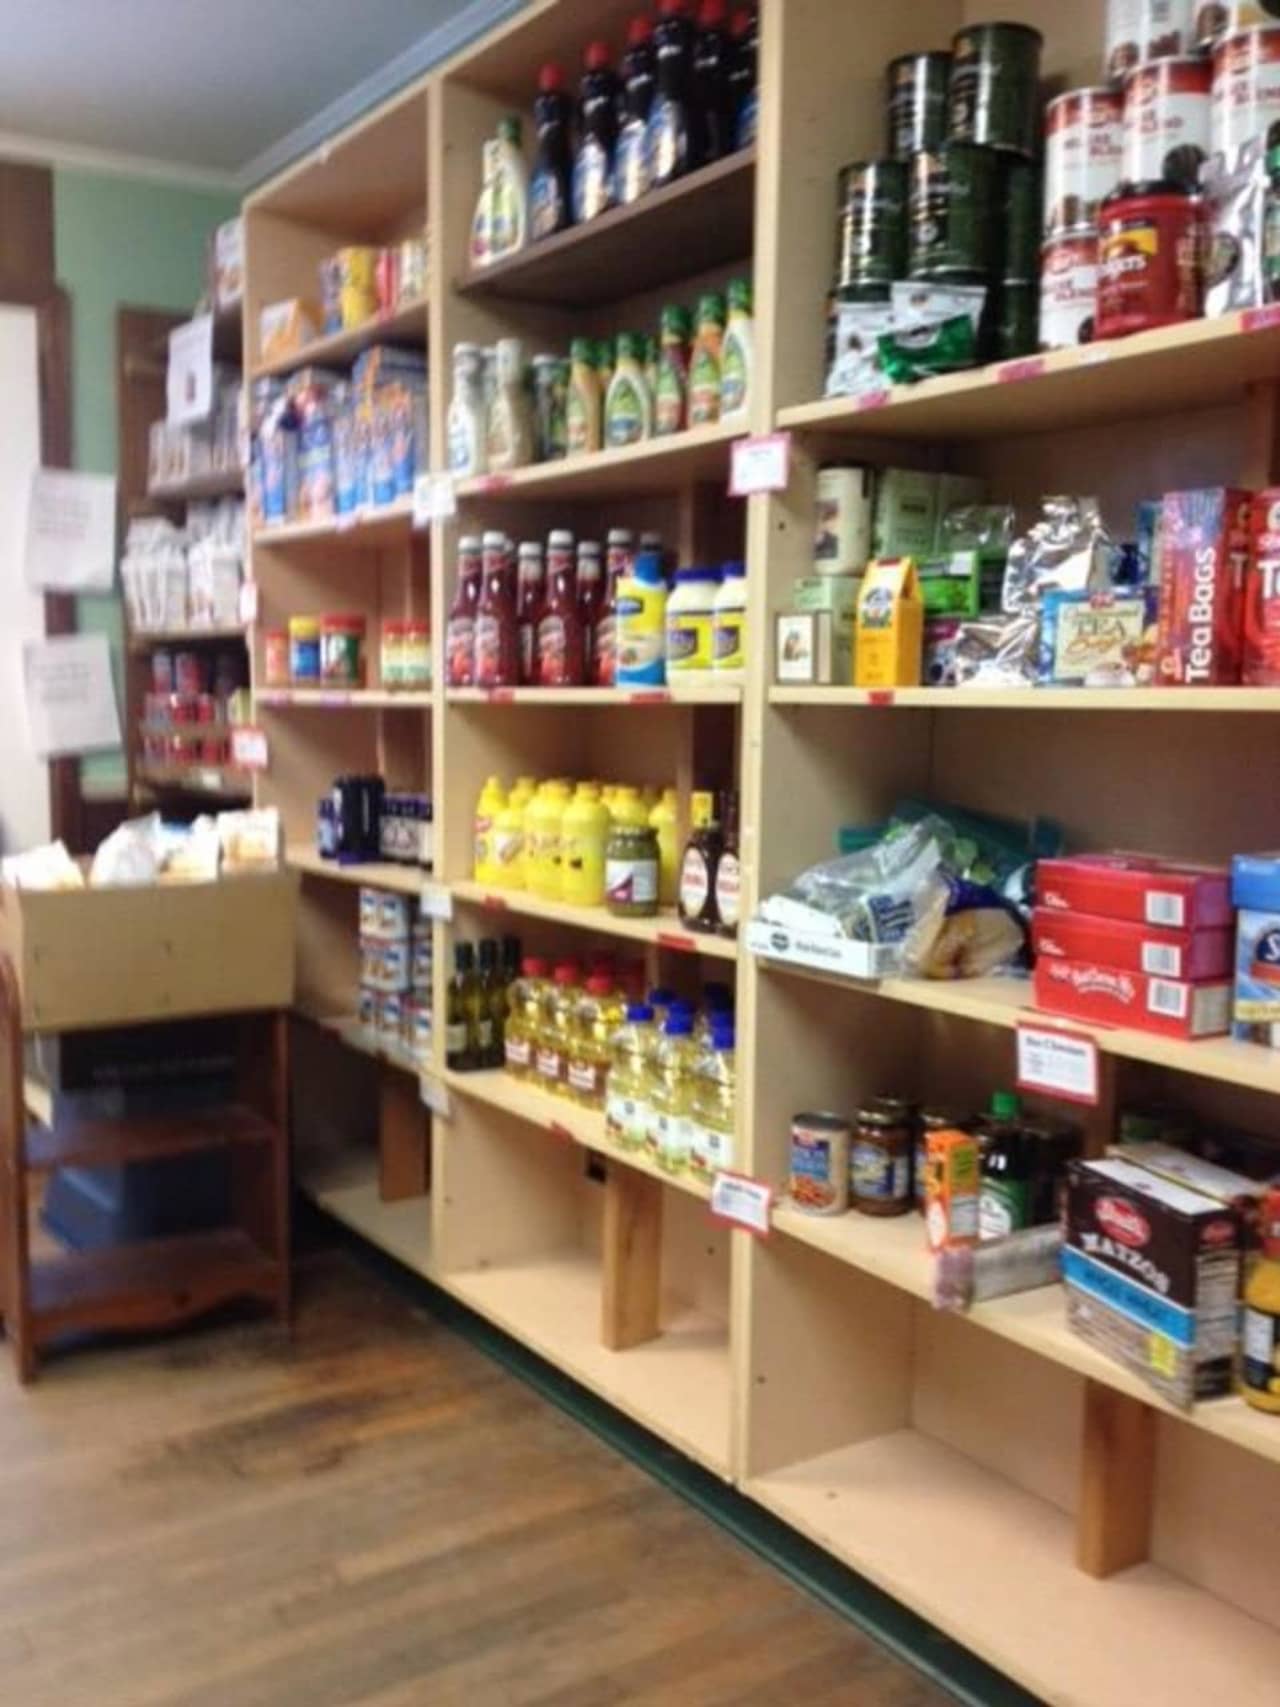 An April Fools Day "10K" calls on volunteers to package and make "runs" of food to the Monroe food pantry and other distribution sites in the region.